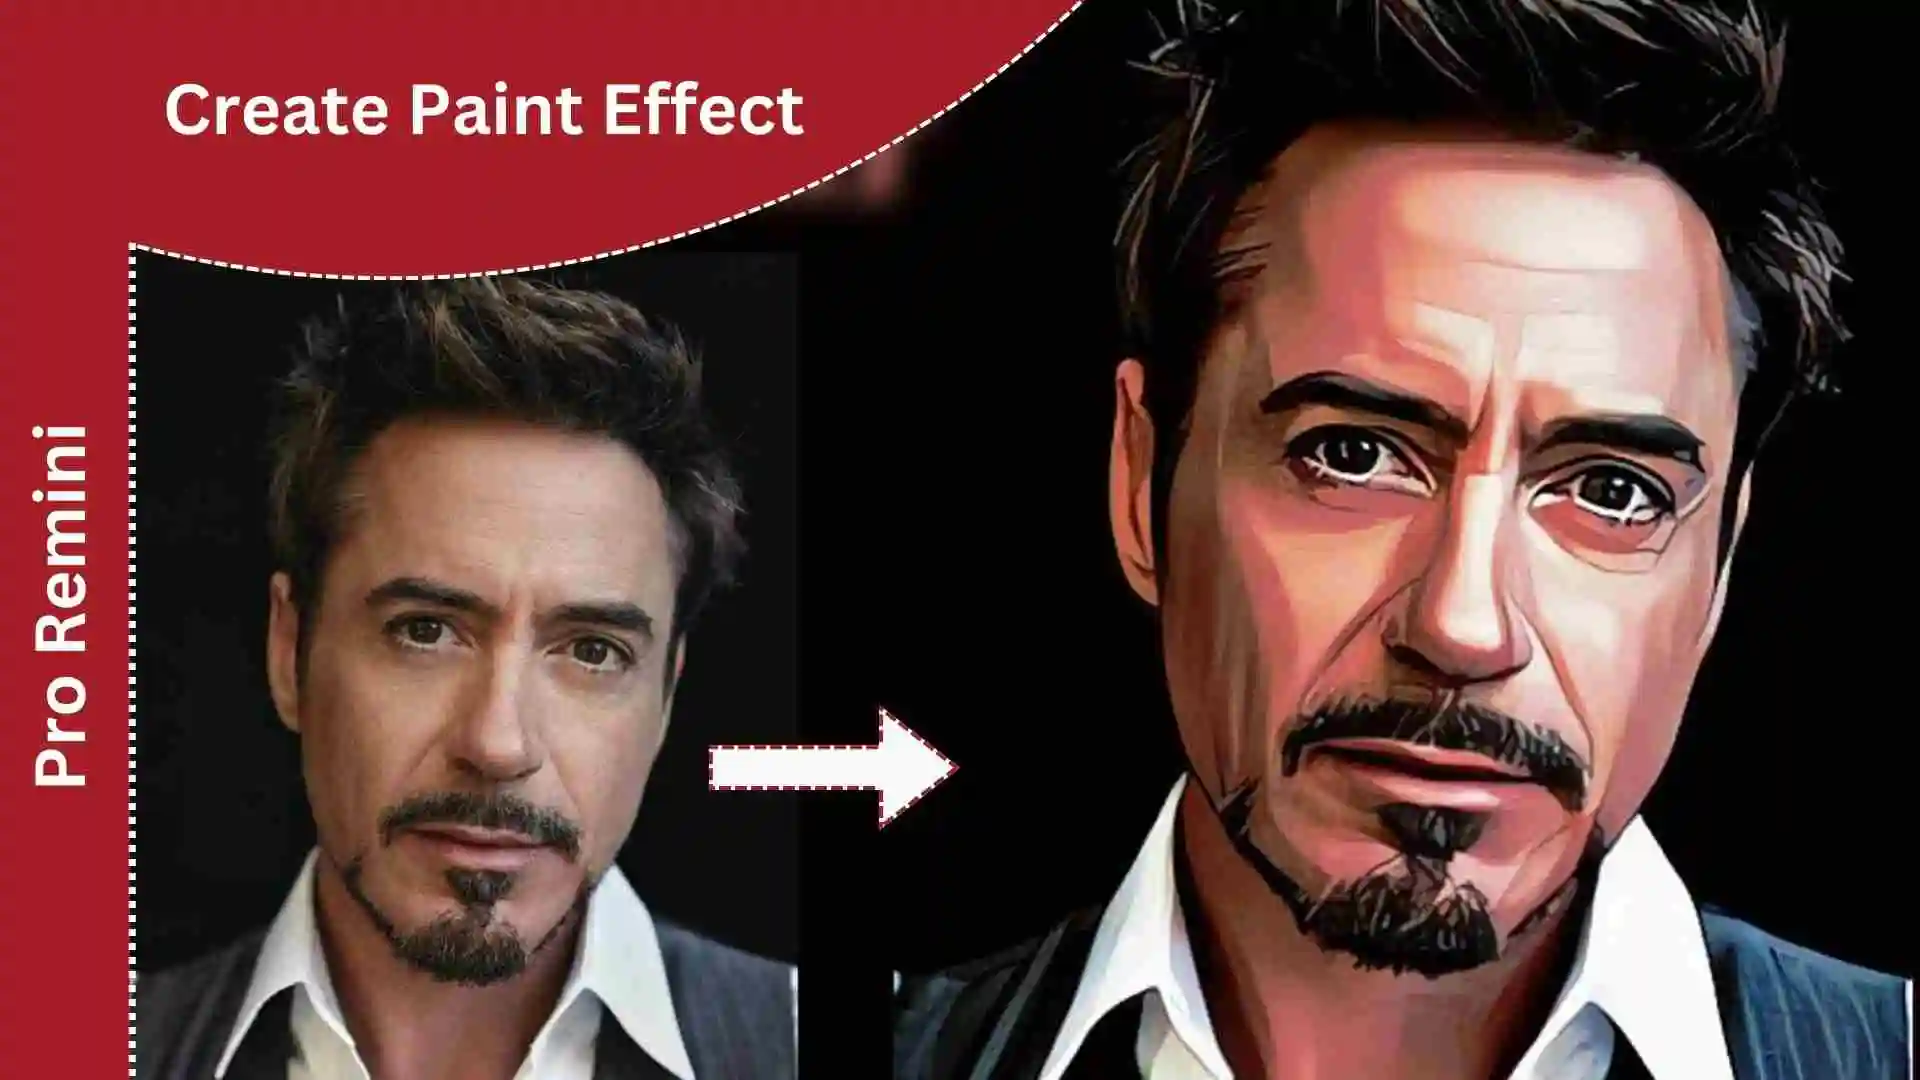 Paint Effect in remini